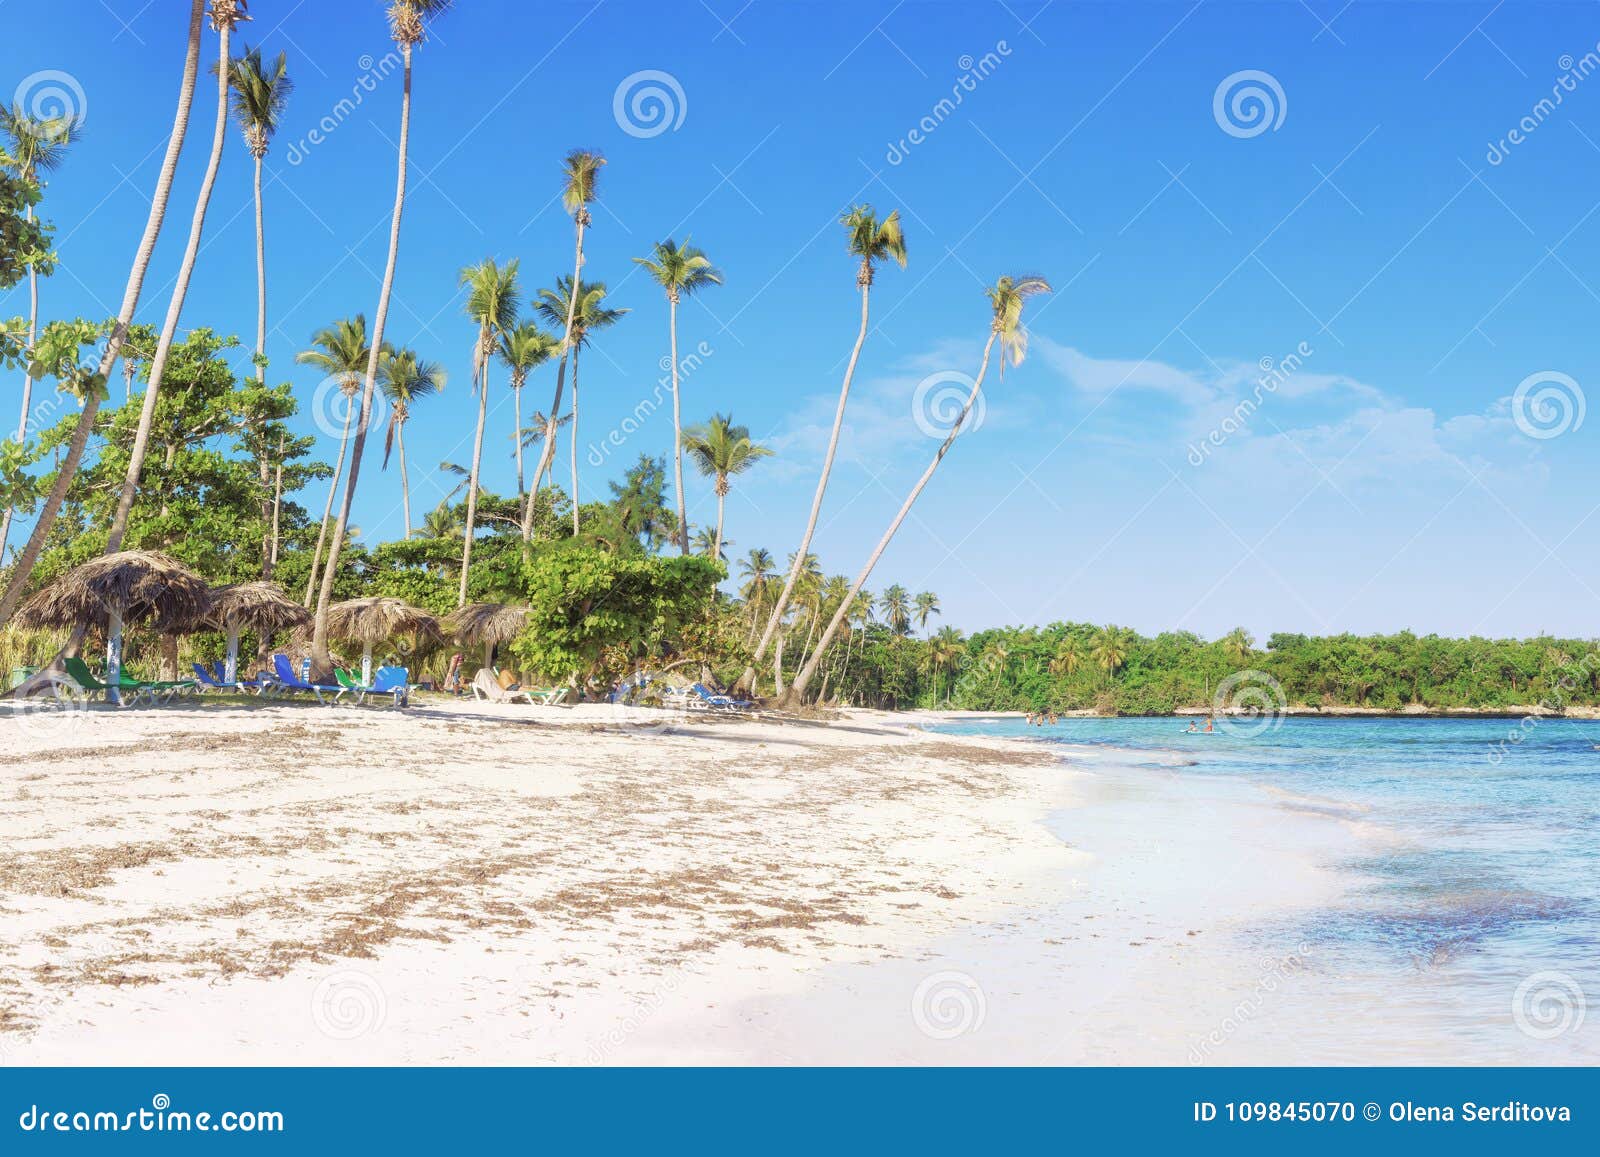 Vacation In Dominican Republic Editorial Image Image Of